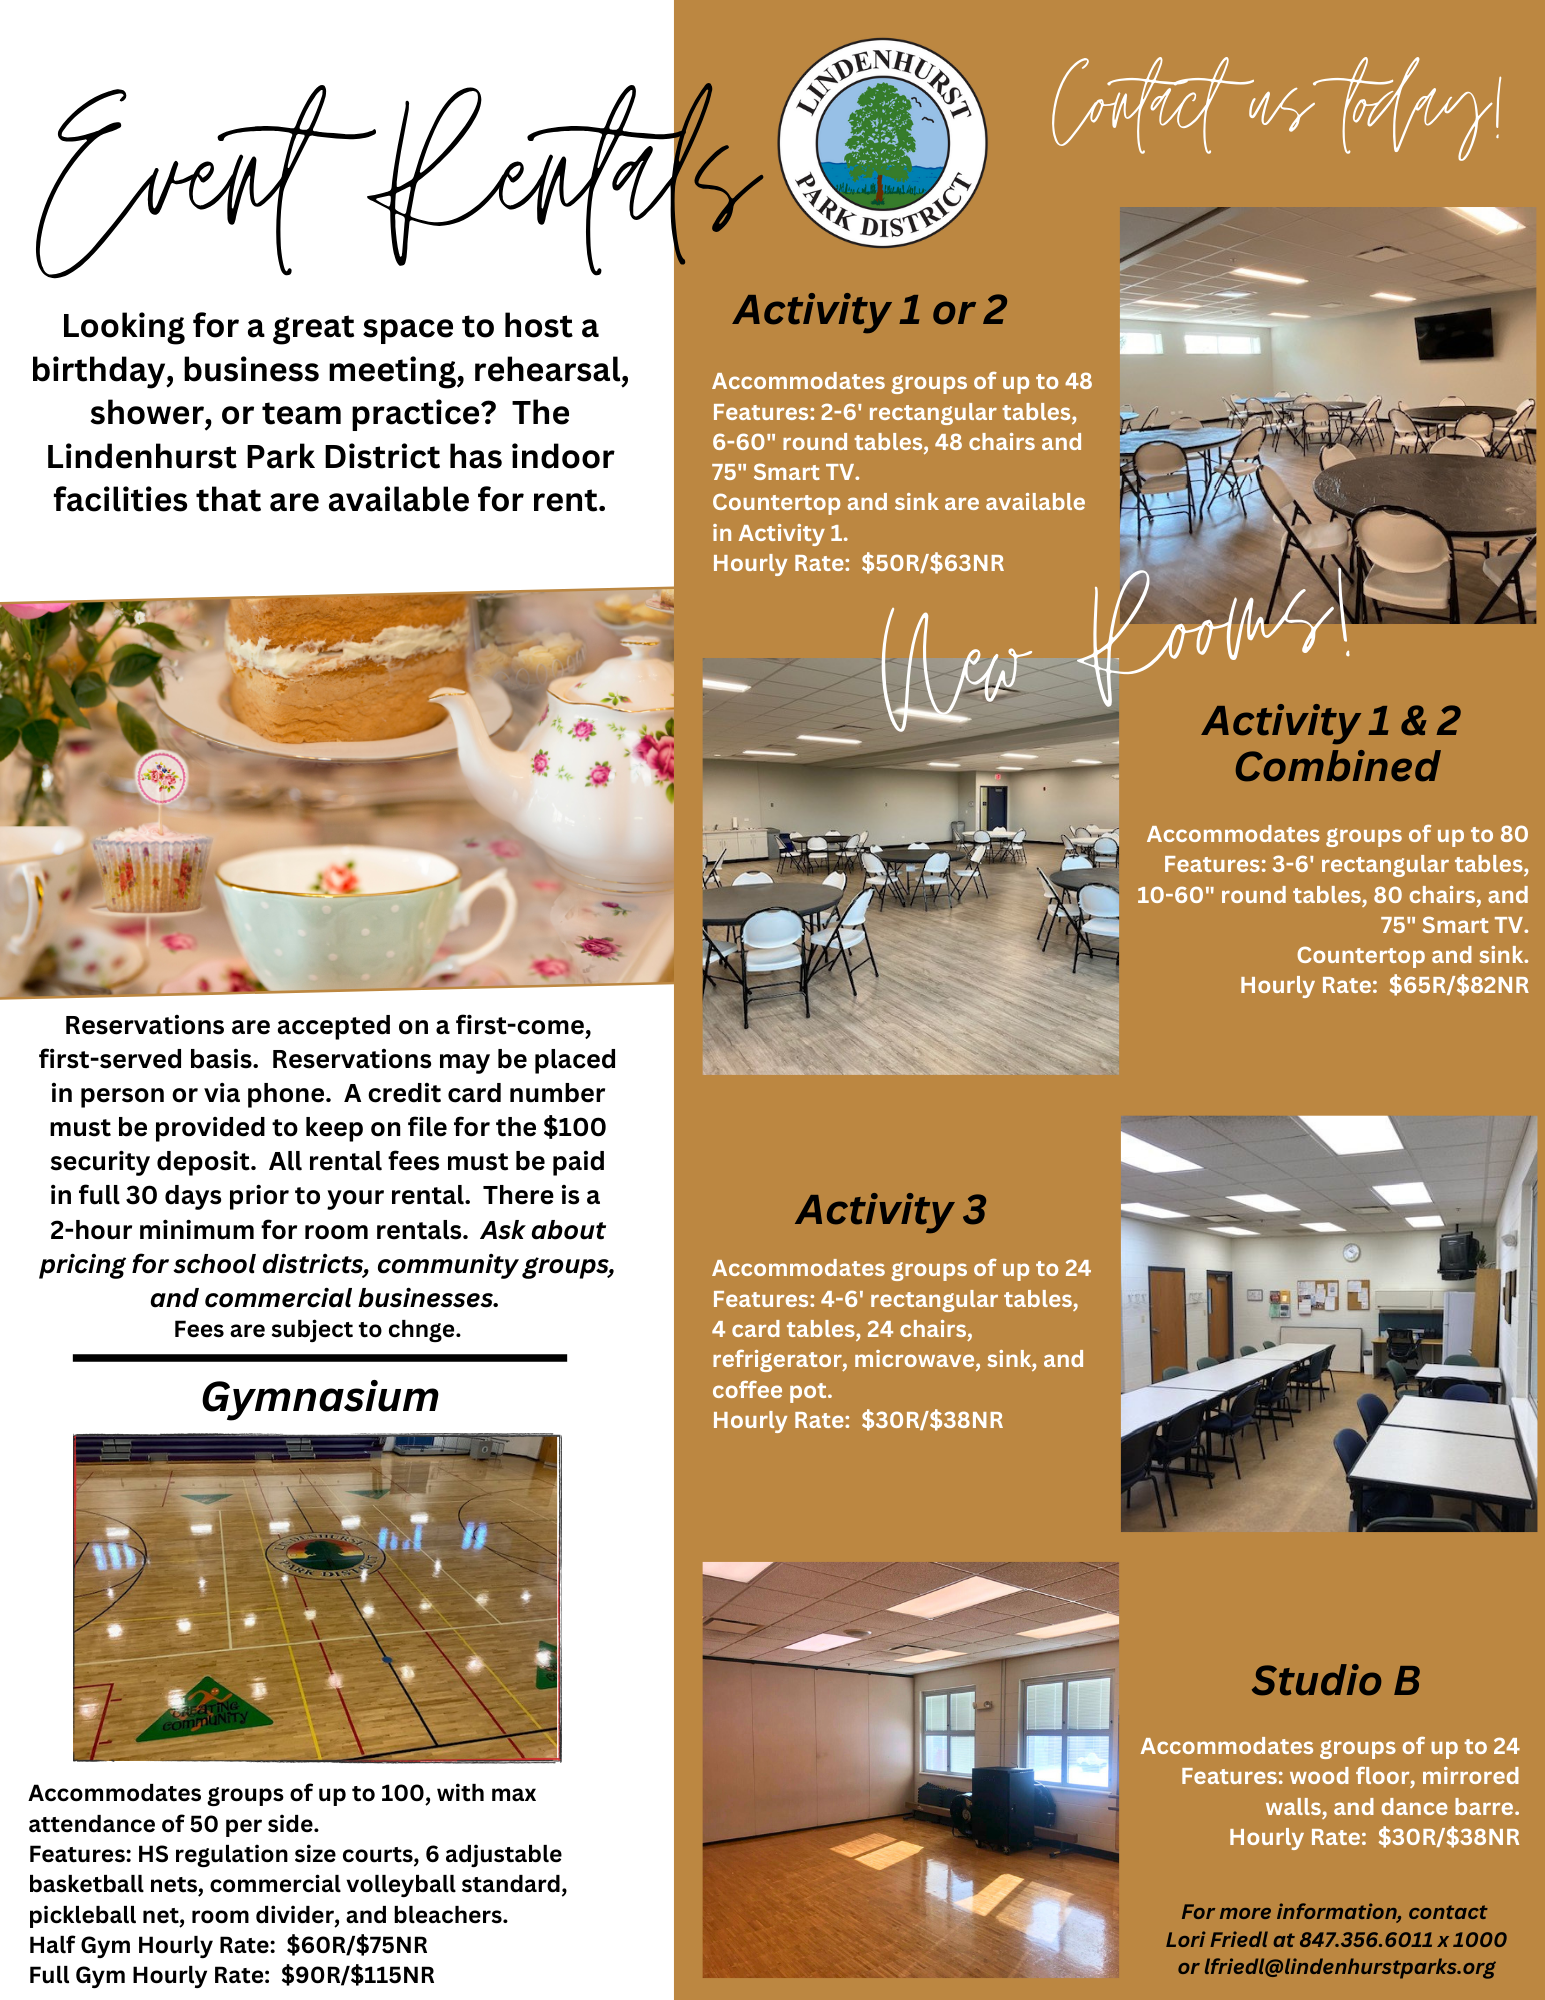 A flyer detailing the indoor facility rental options available at Lindenhurst Park District for events like birthdays, business meetings, and rehearsals. It lists various venues: Activity Room 1 or 2, Activity Rooms 1 & 2 Combined, Activity Room 3, Gymnasium, and Studio B, with capacity, features, and hourly rates provided for each. The flyer includes images of the spaces, tea set, and contact information for reservations. There’s also a note on reservation policies, including a security deposit and full payment requirement 30 days prior to the even